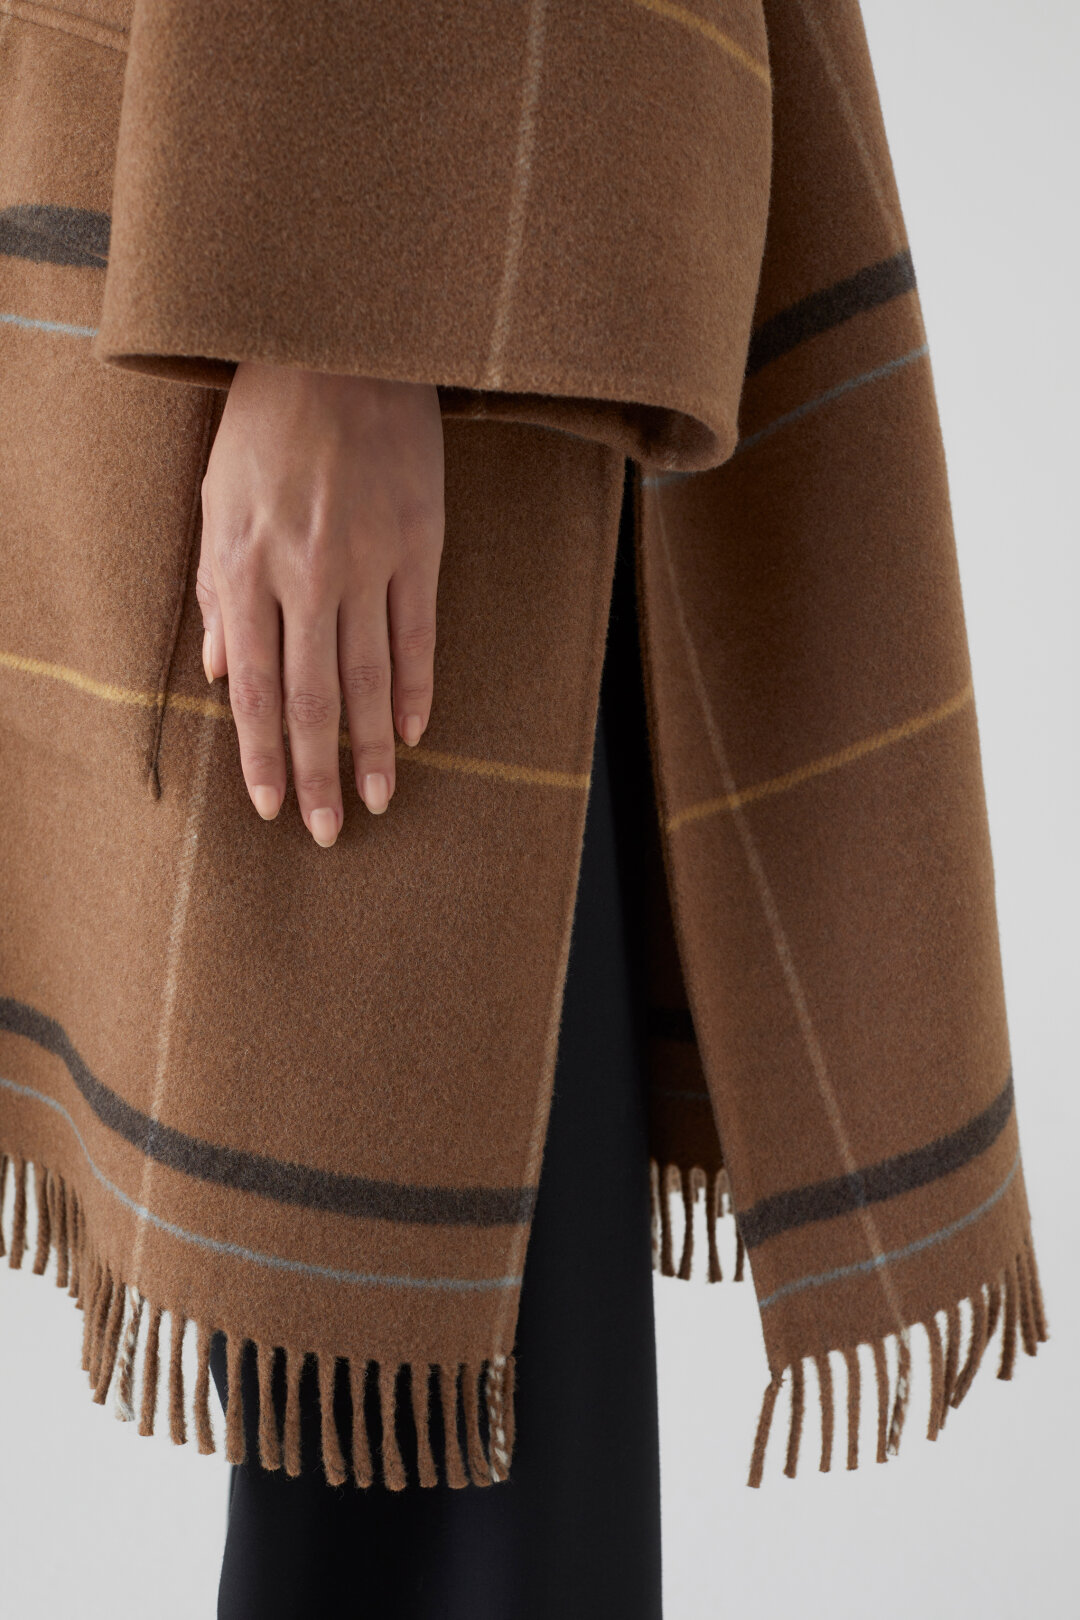 Closed Check Poncho Coat in Camel XS